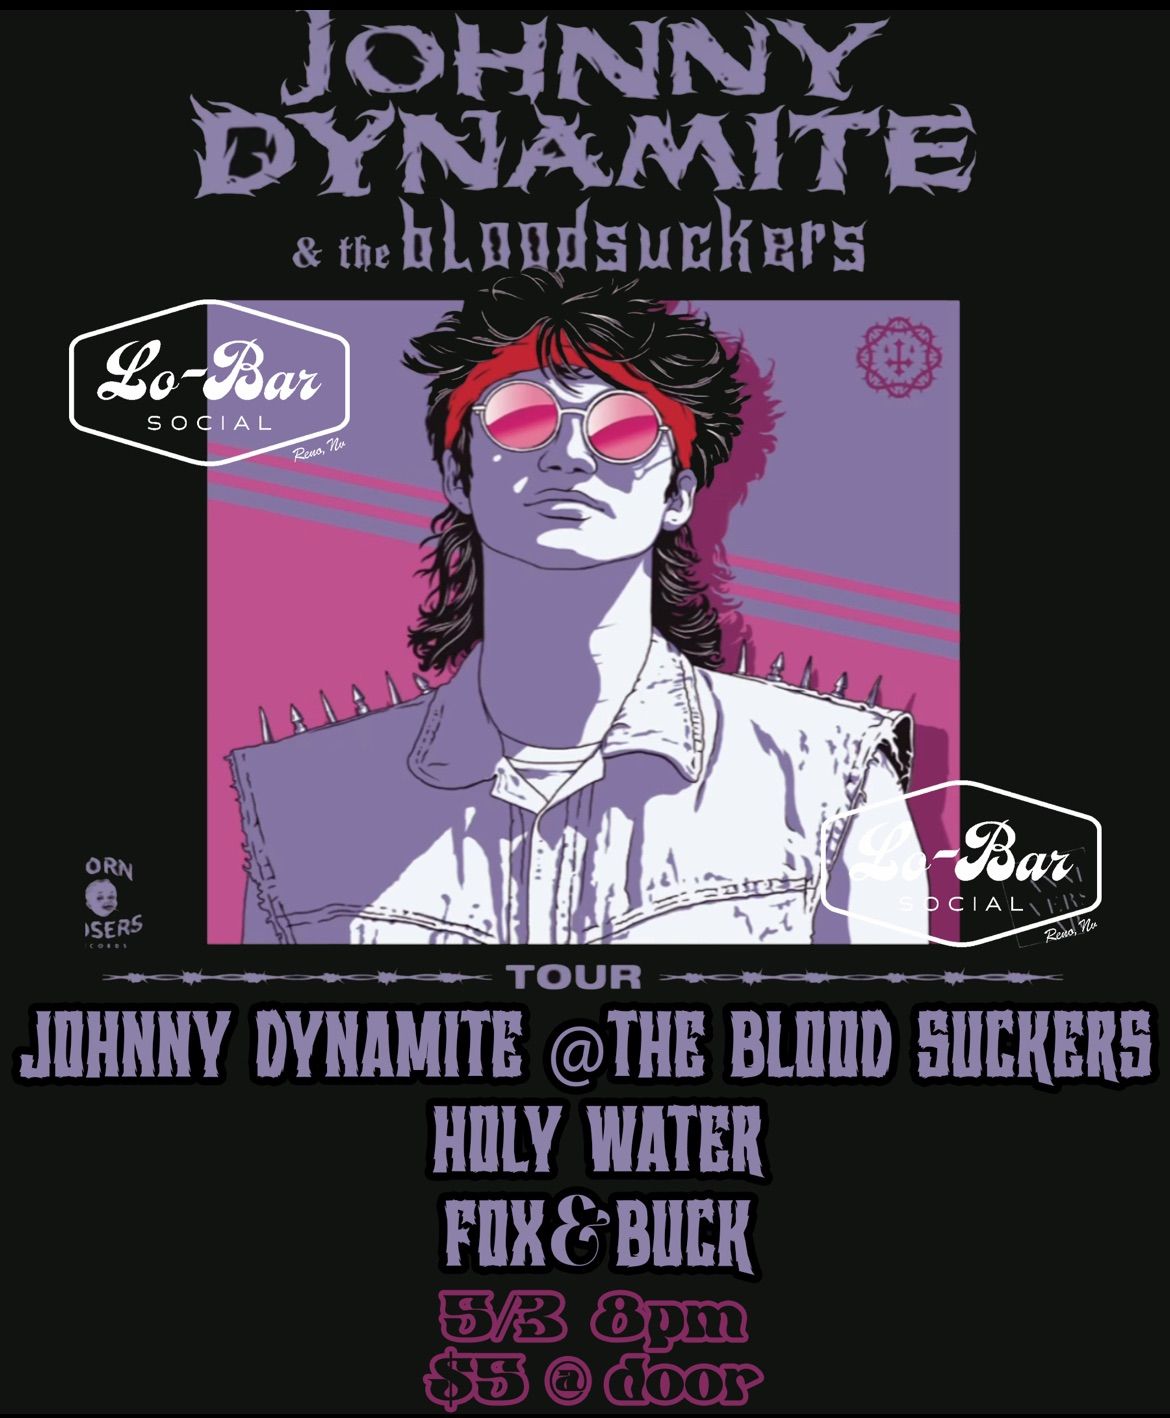 Johnny Dynamite & the Blood Suckers, Holy Water, Fox & Buck